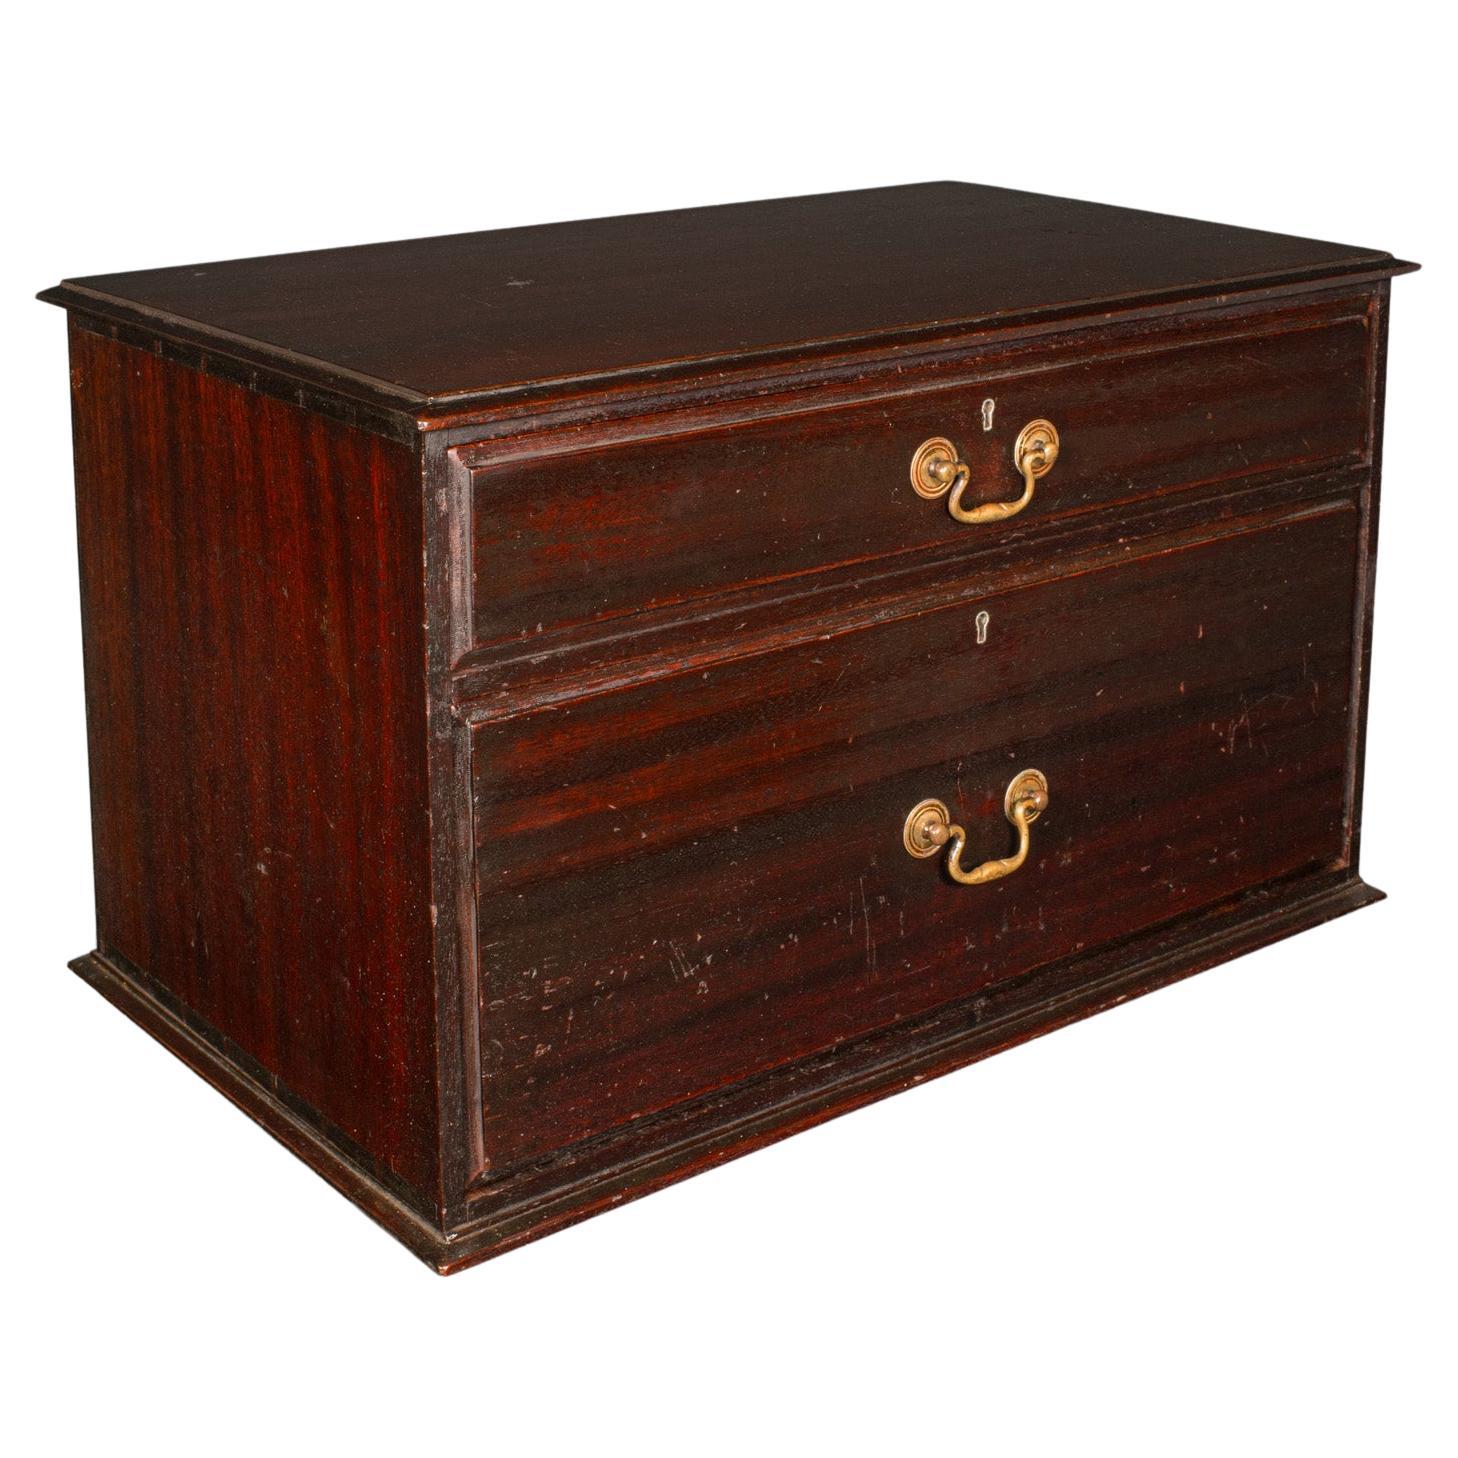 Antique Watchmaker's Cabinet, English, Tabletop Work Chest, Victorian, C.1860 For Sale